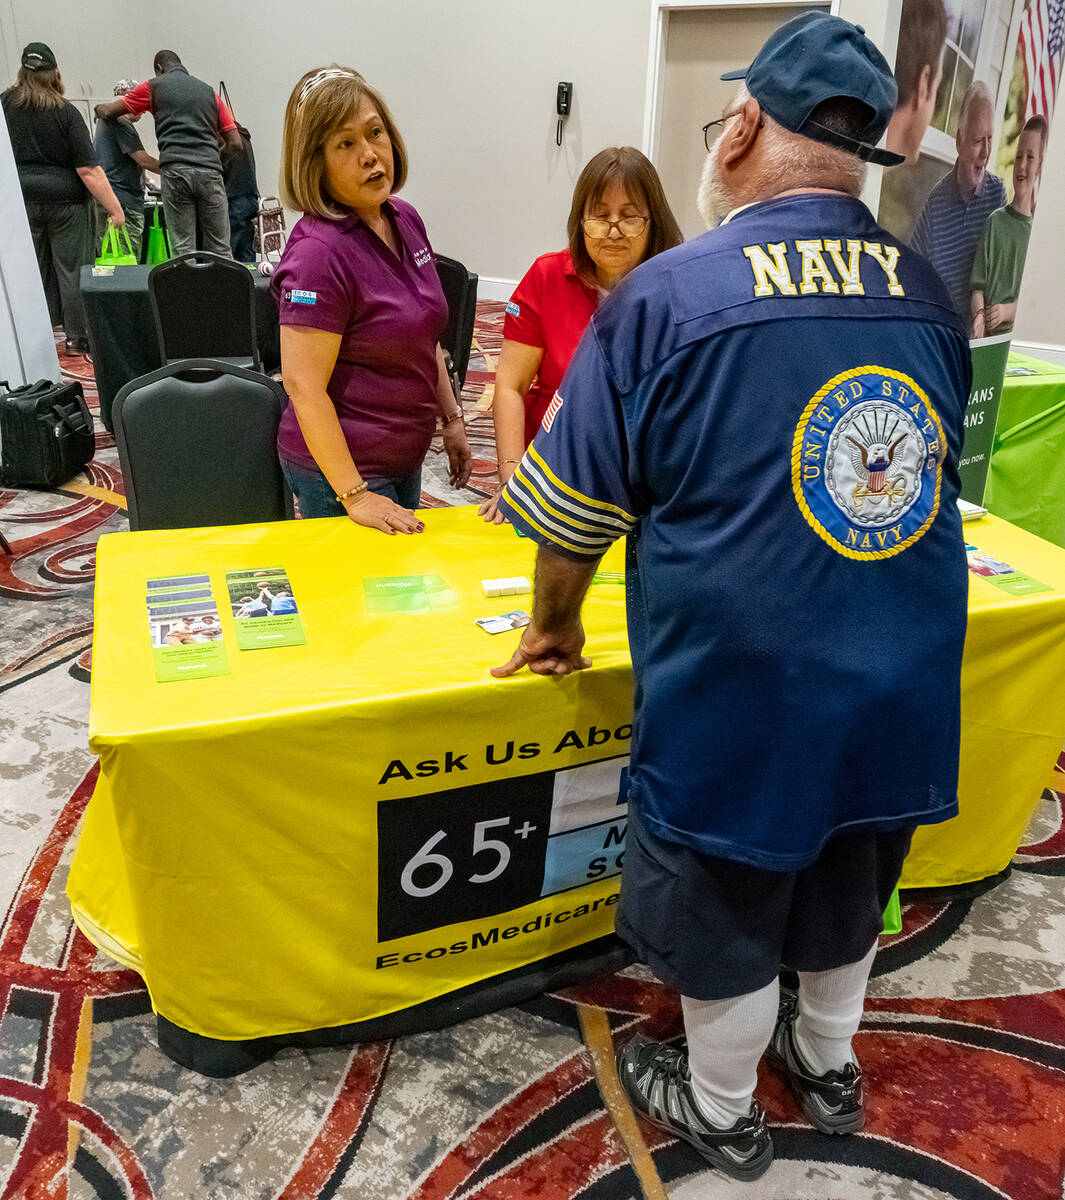 John Clausen/Pahrump Valley Times A Navy veteran chats with a vendor taking part in the Pahrump ...